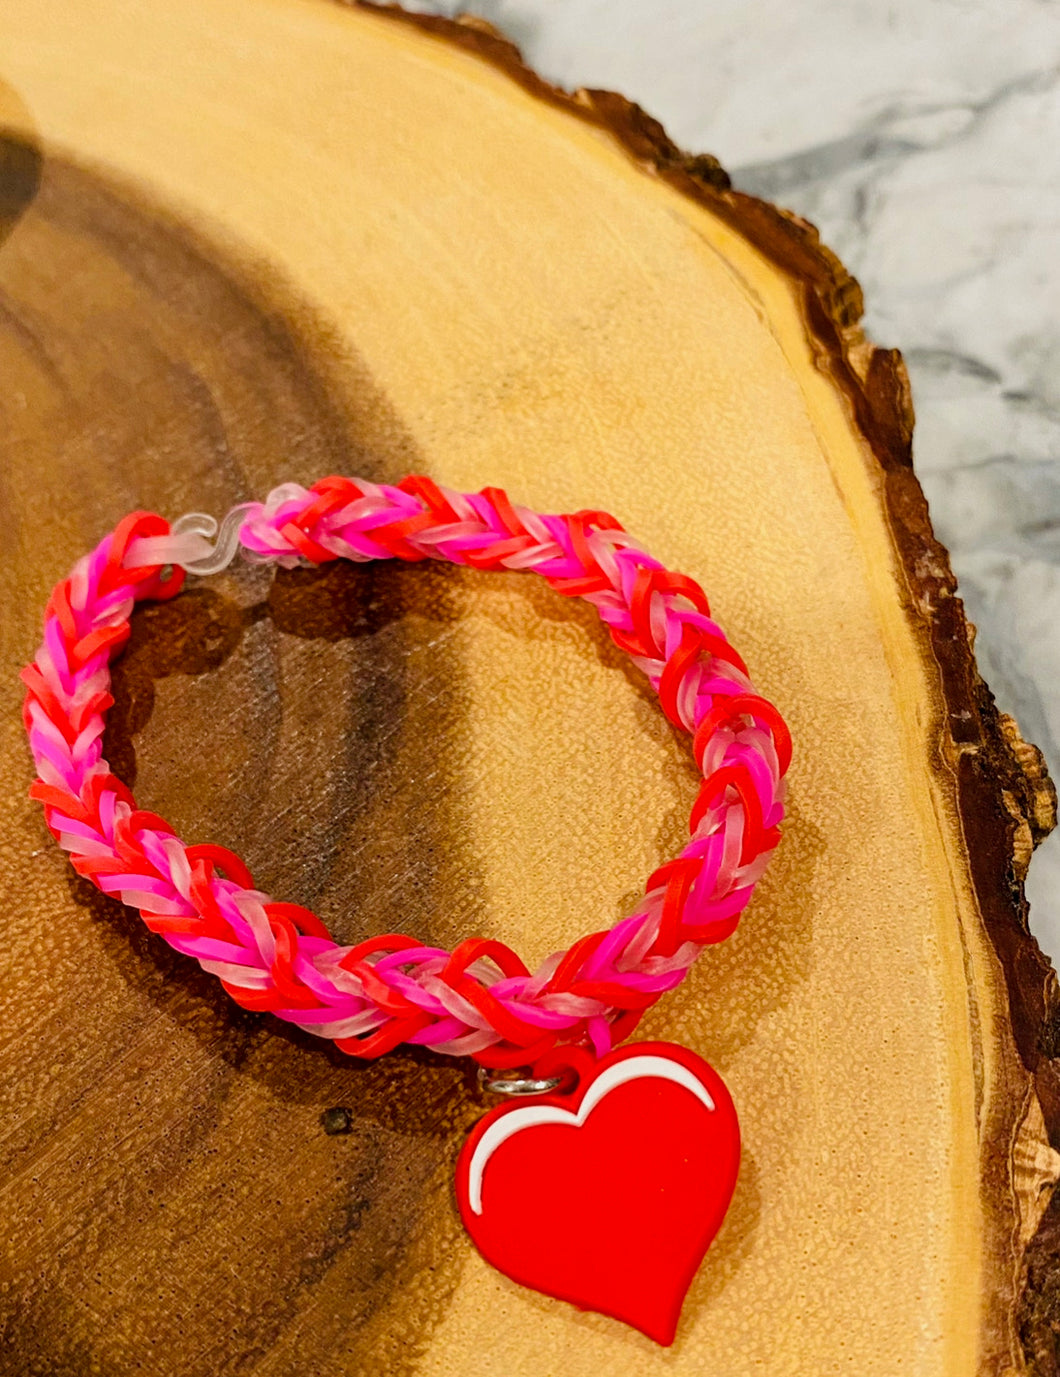 Buy Loom Bands Crafts: Make Rubber Band Bracelets, Jewelry & More!: Make  Beautiful Rubber Band Bracelets, Jewelry, and More! Book Online at Low  Prices in India | Loom Bands Crafts: Make Rubber